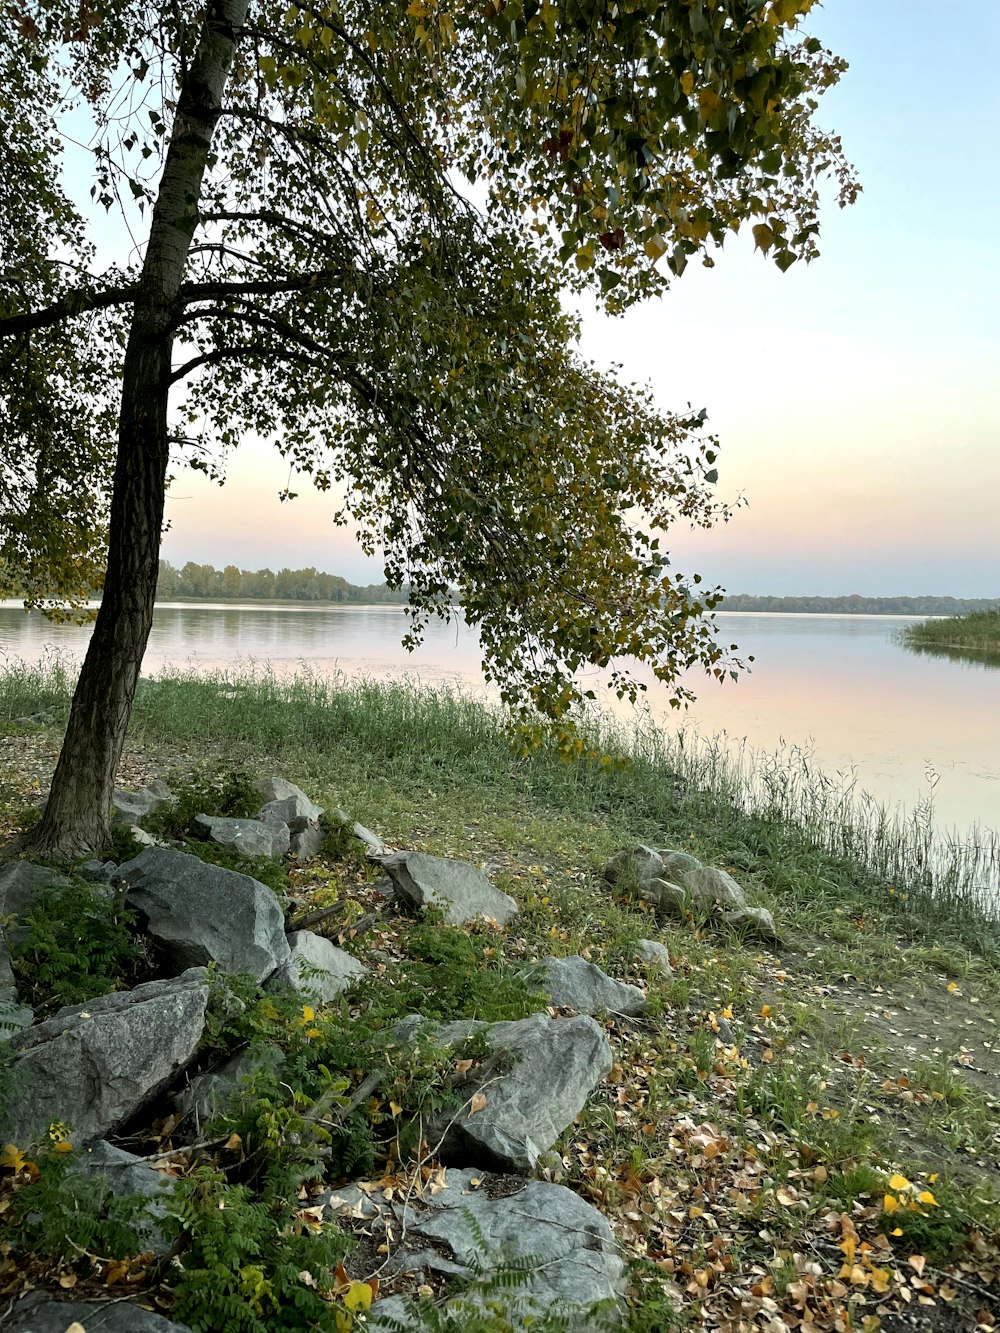 a bench sitting next to a tree near a body of water